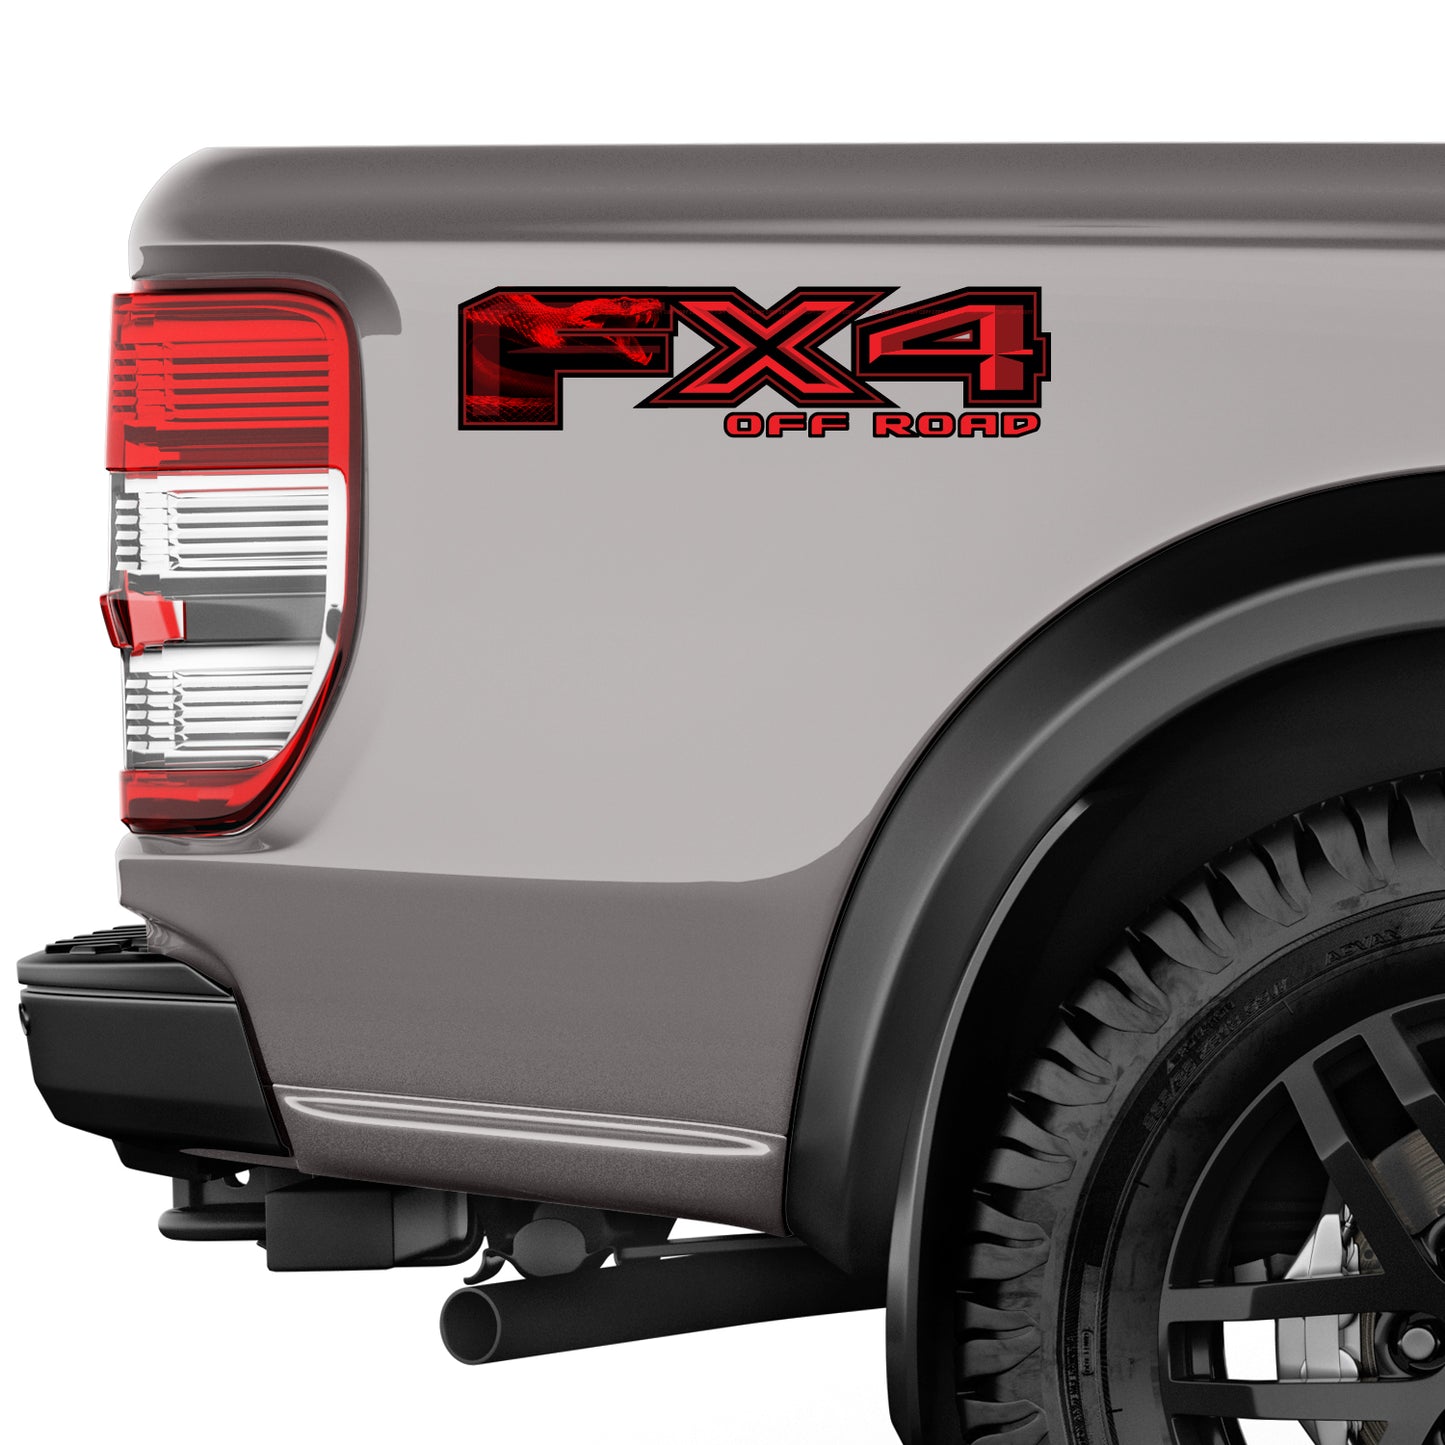 FX4 Off Road Snake Decal Replacement Sticker Ford F 150 Bedside Emblem for 4x4 Truck Super Duty